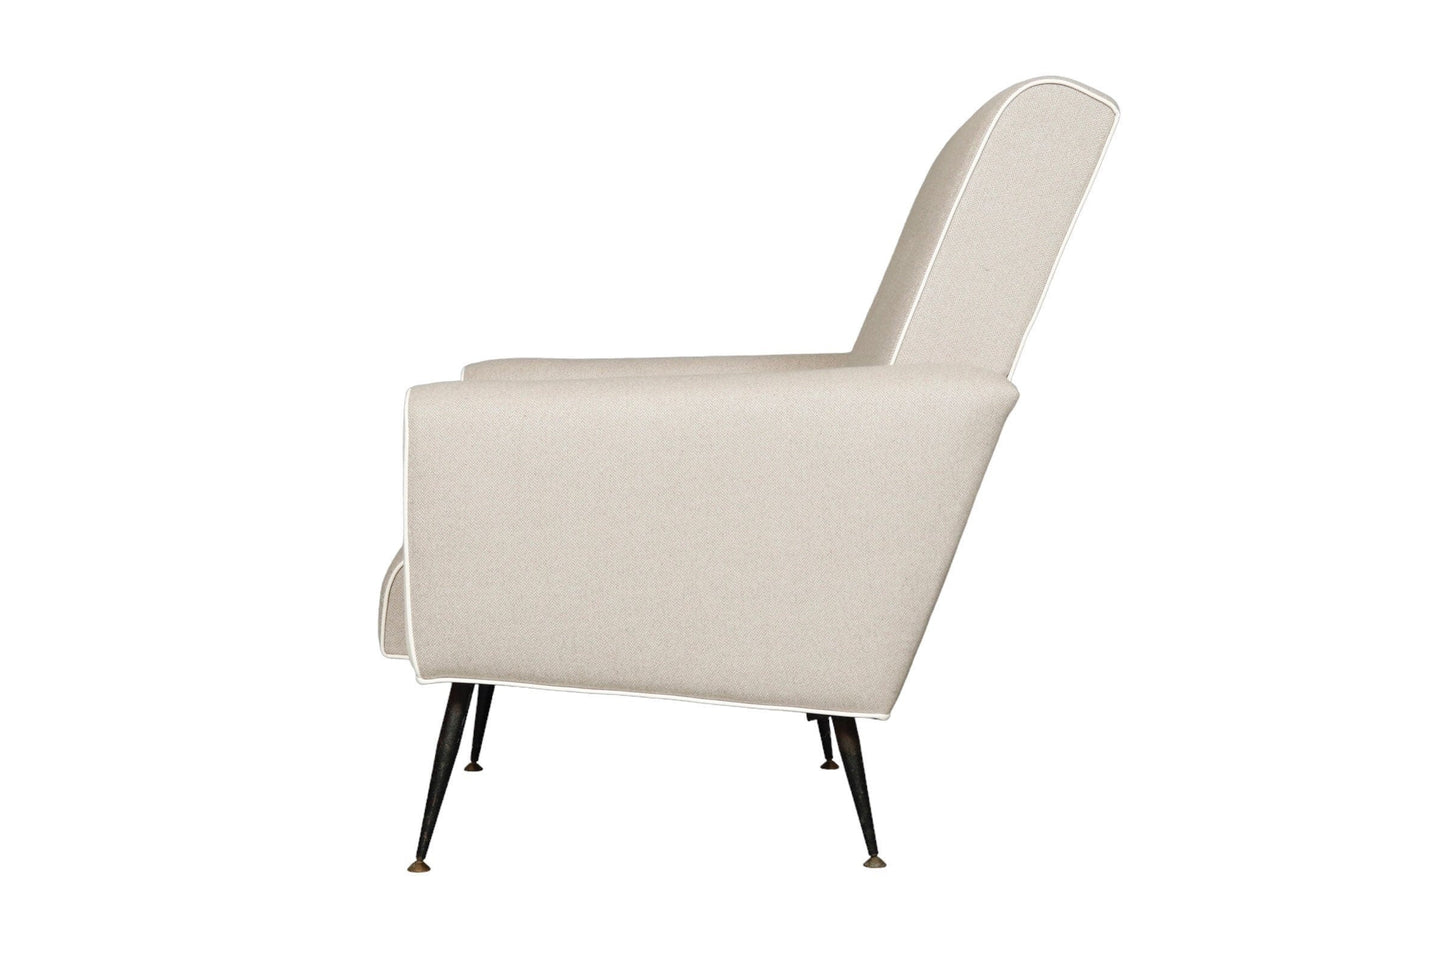 Italian Mid Century Lounge Chair in Curated New Upholstery